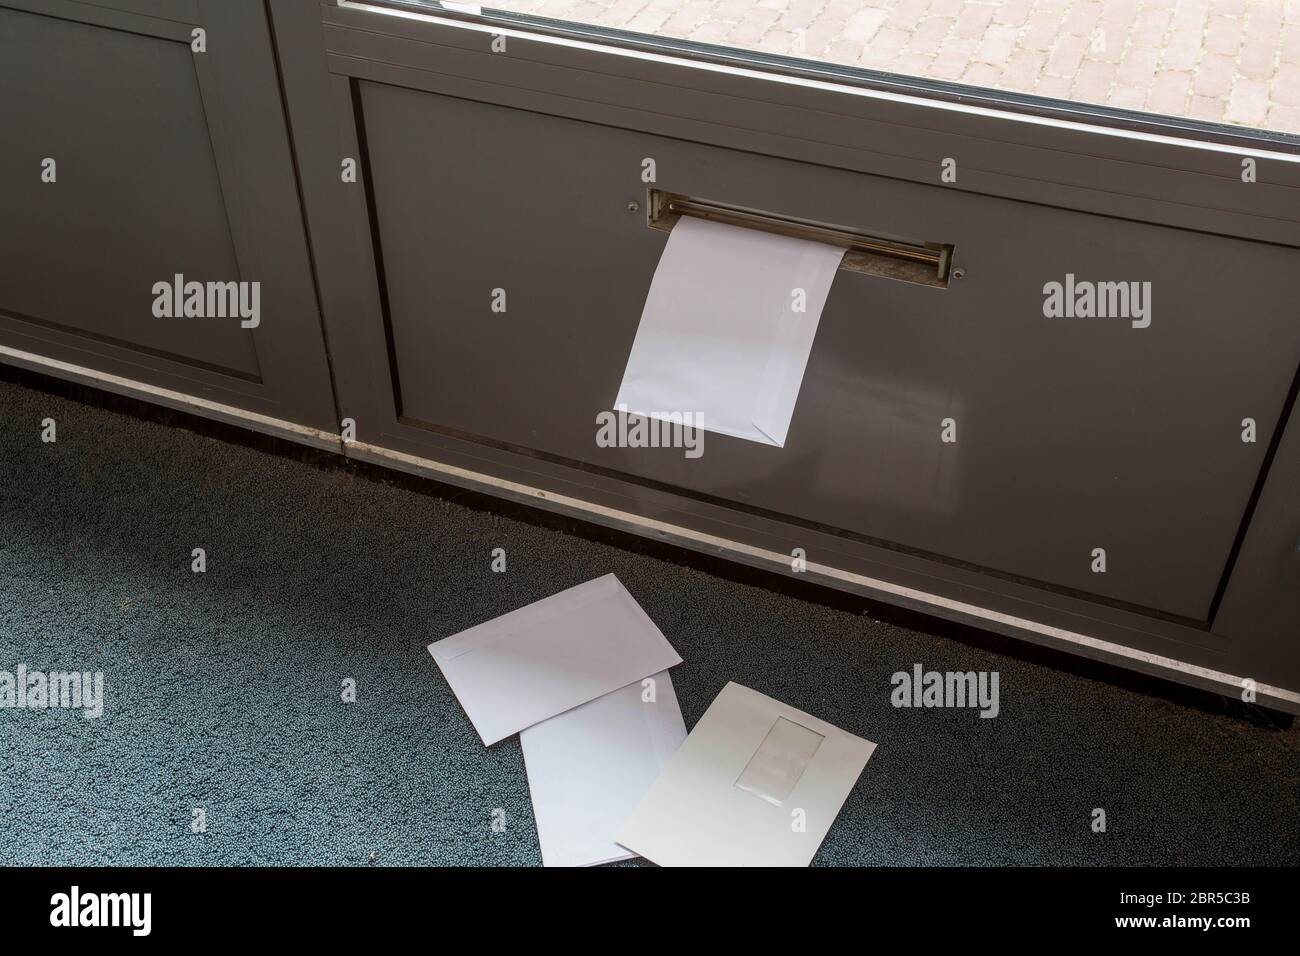 Post lying on the floor and in the door mailbox in a empty building close-up Stock Photo